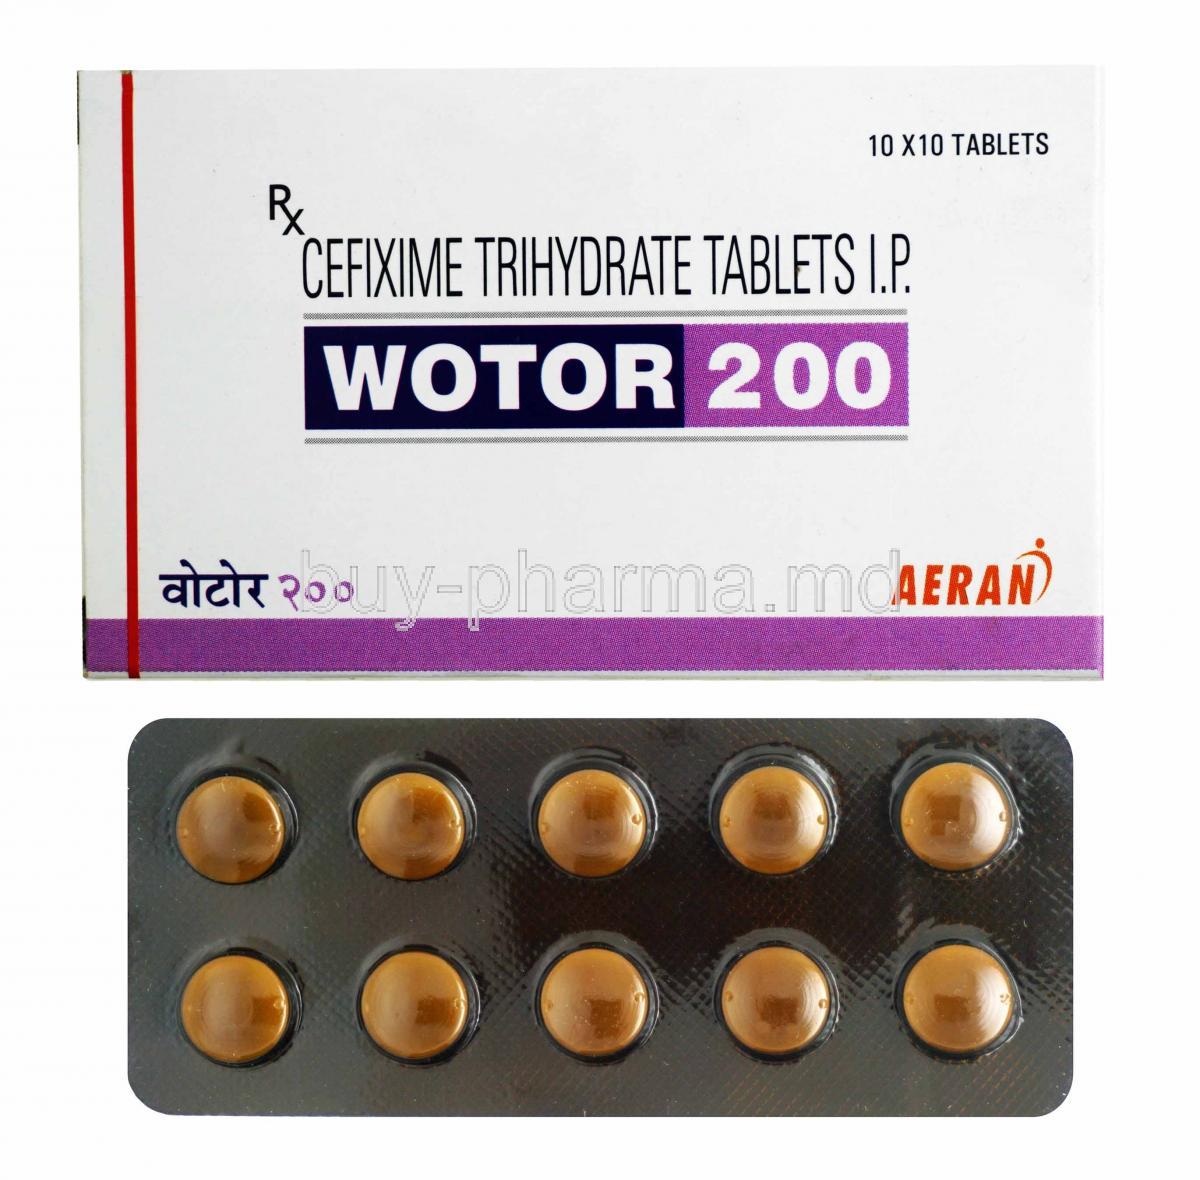 Wotor, Cefixime 200mg box and tablets